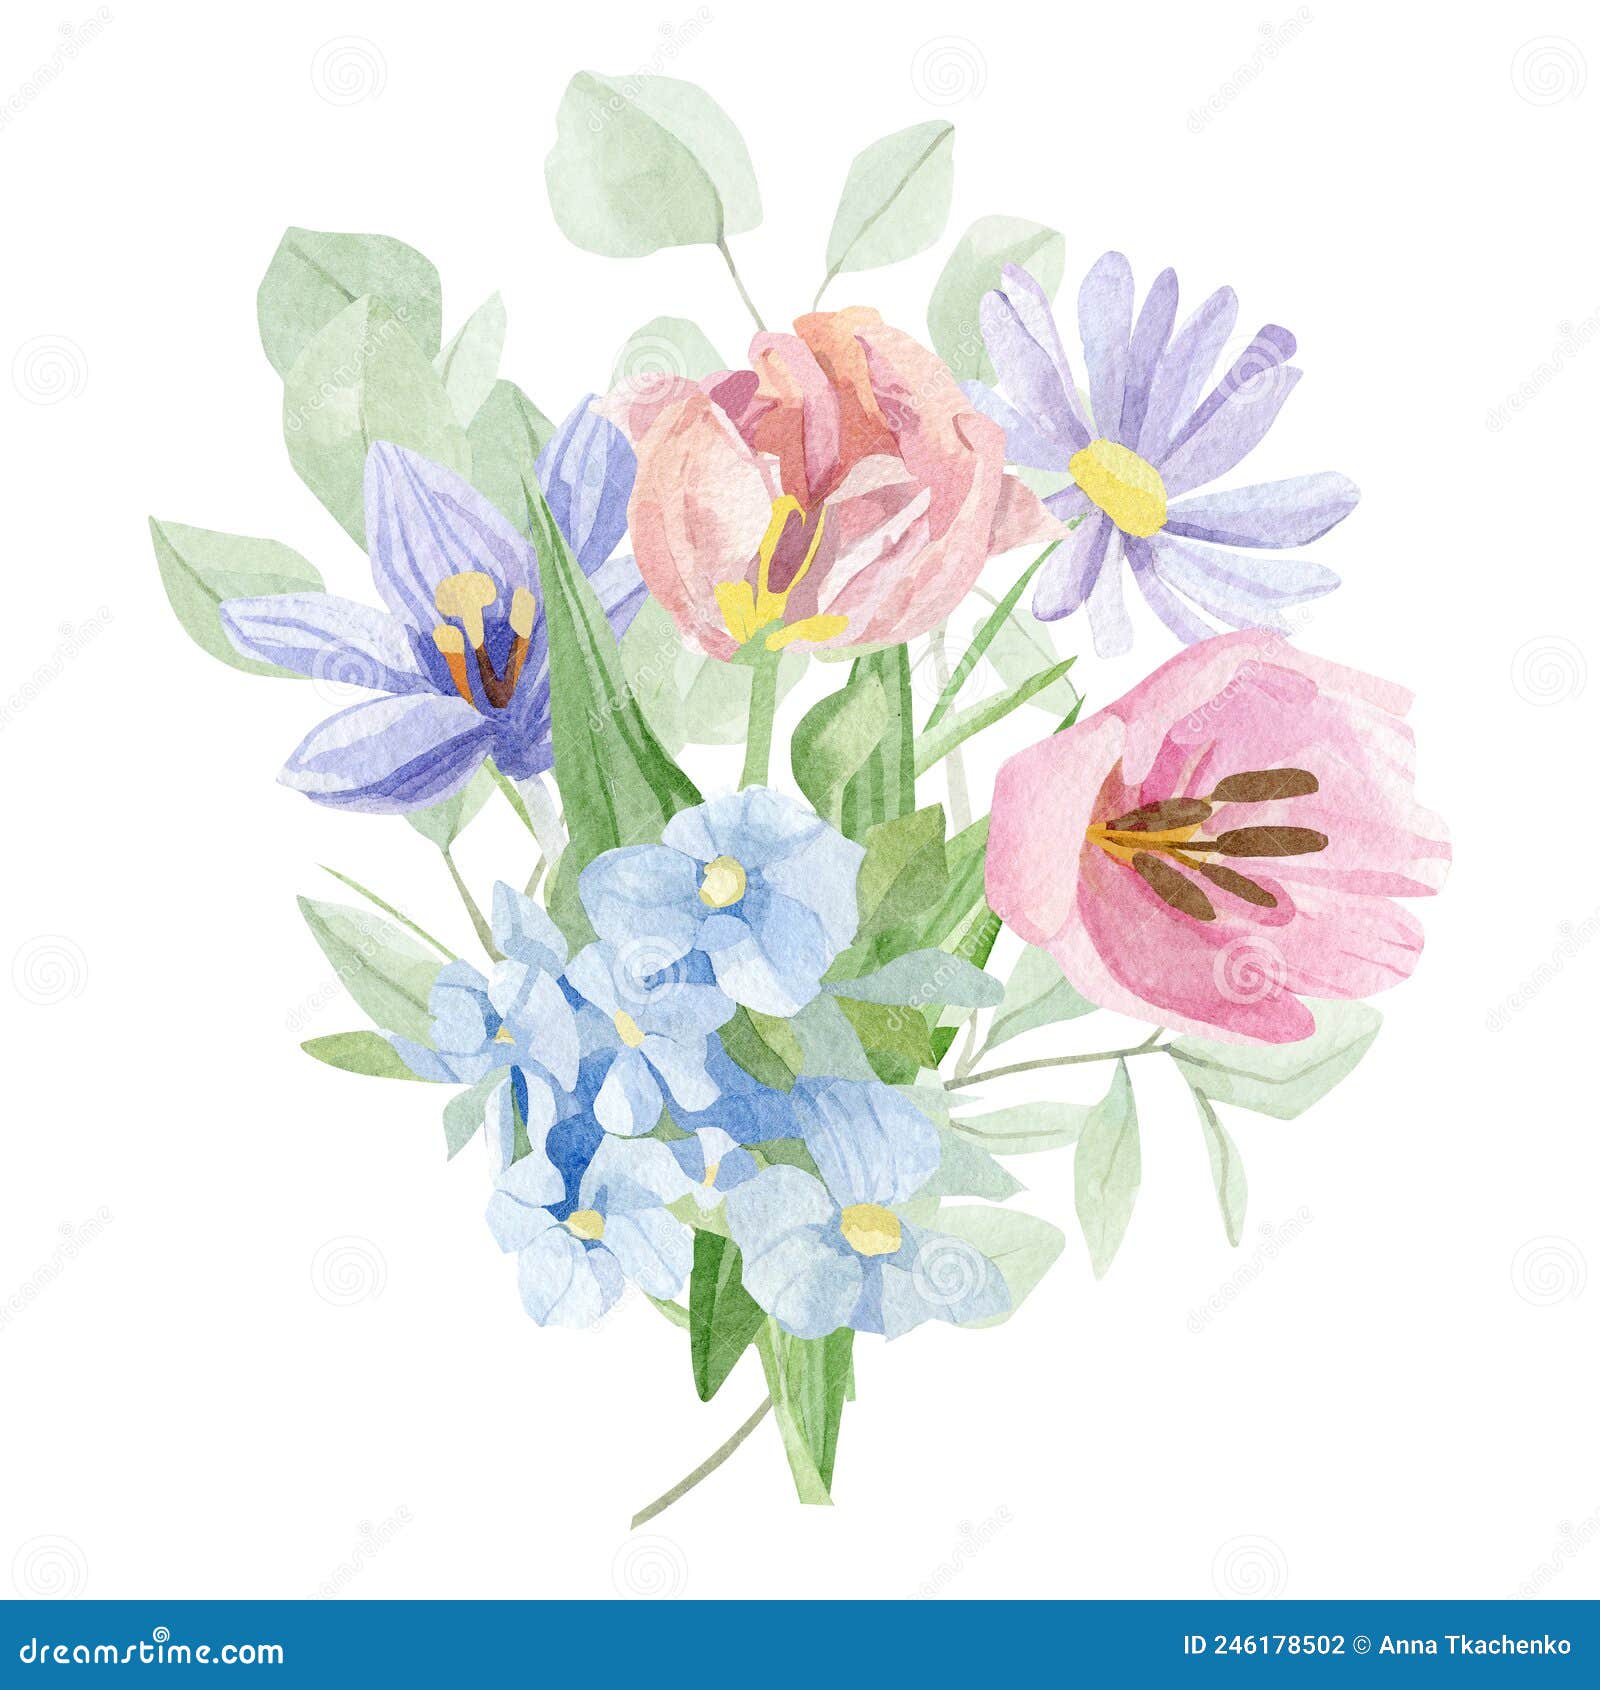 Watercolor Floral Bouquet Illustration with Tulips, Wildflowers, Green ...